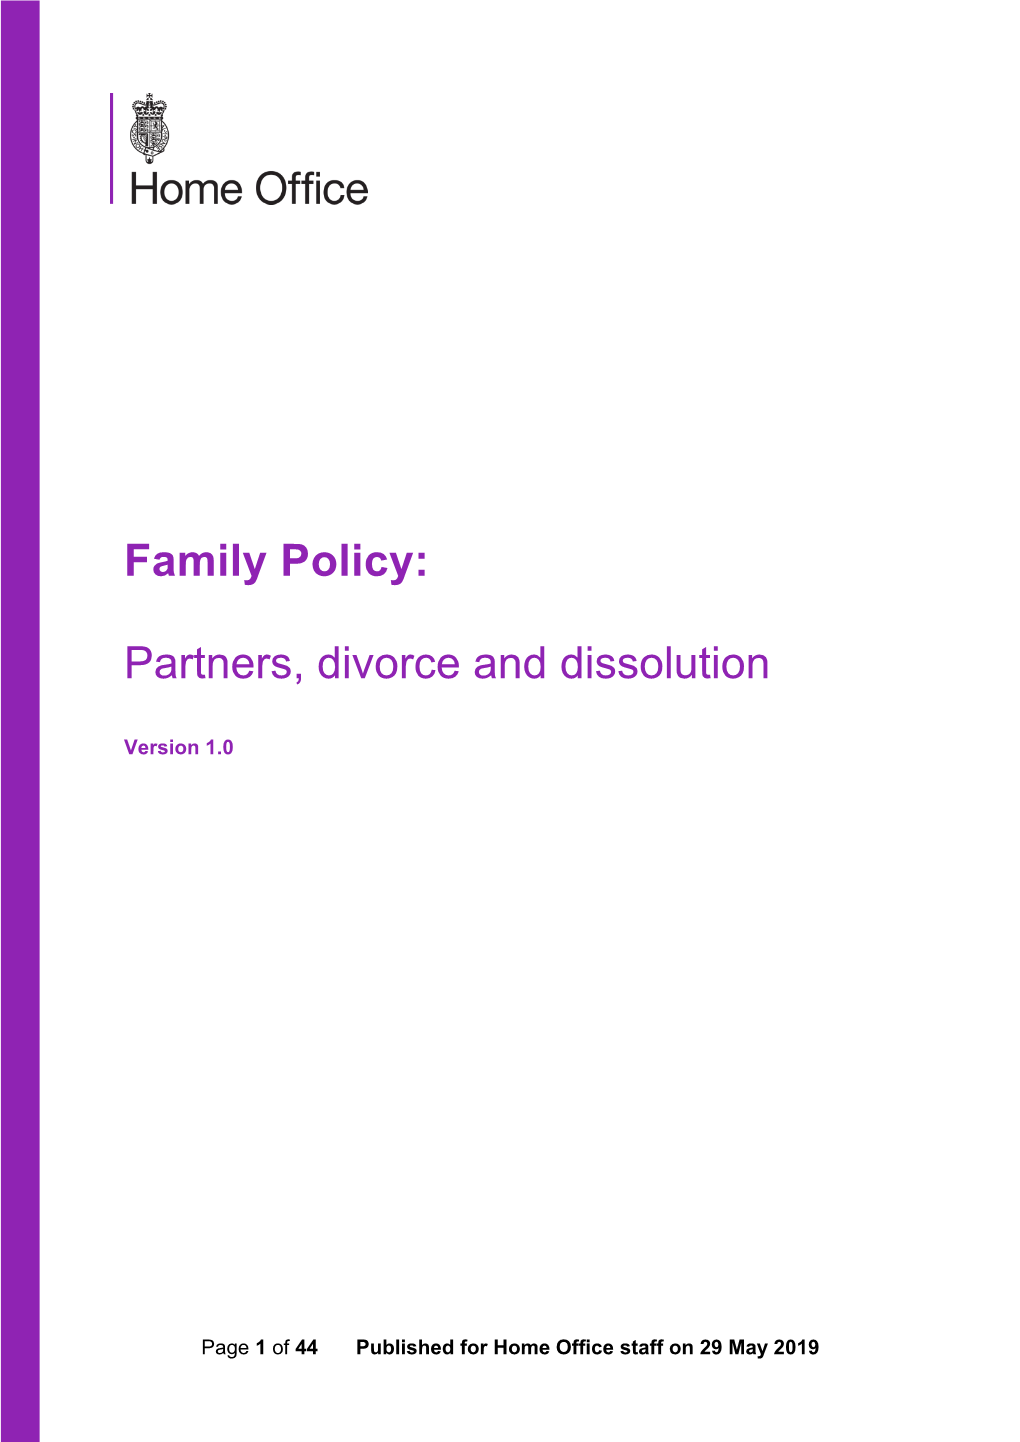 Family Policy: Partners, Divorce and Dissolution